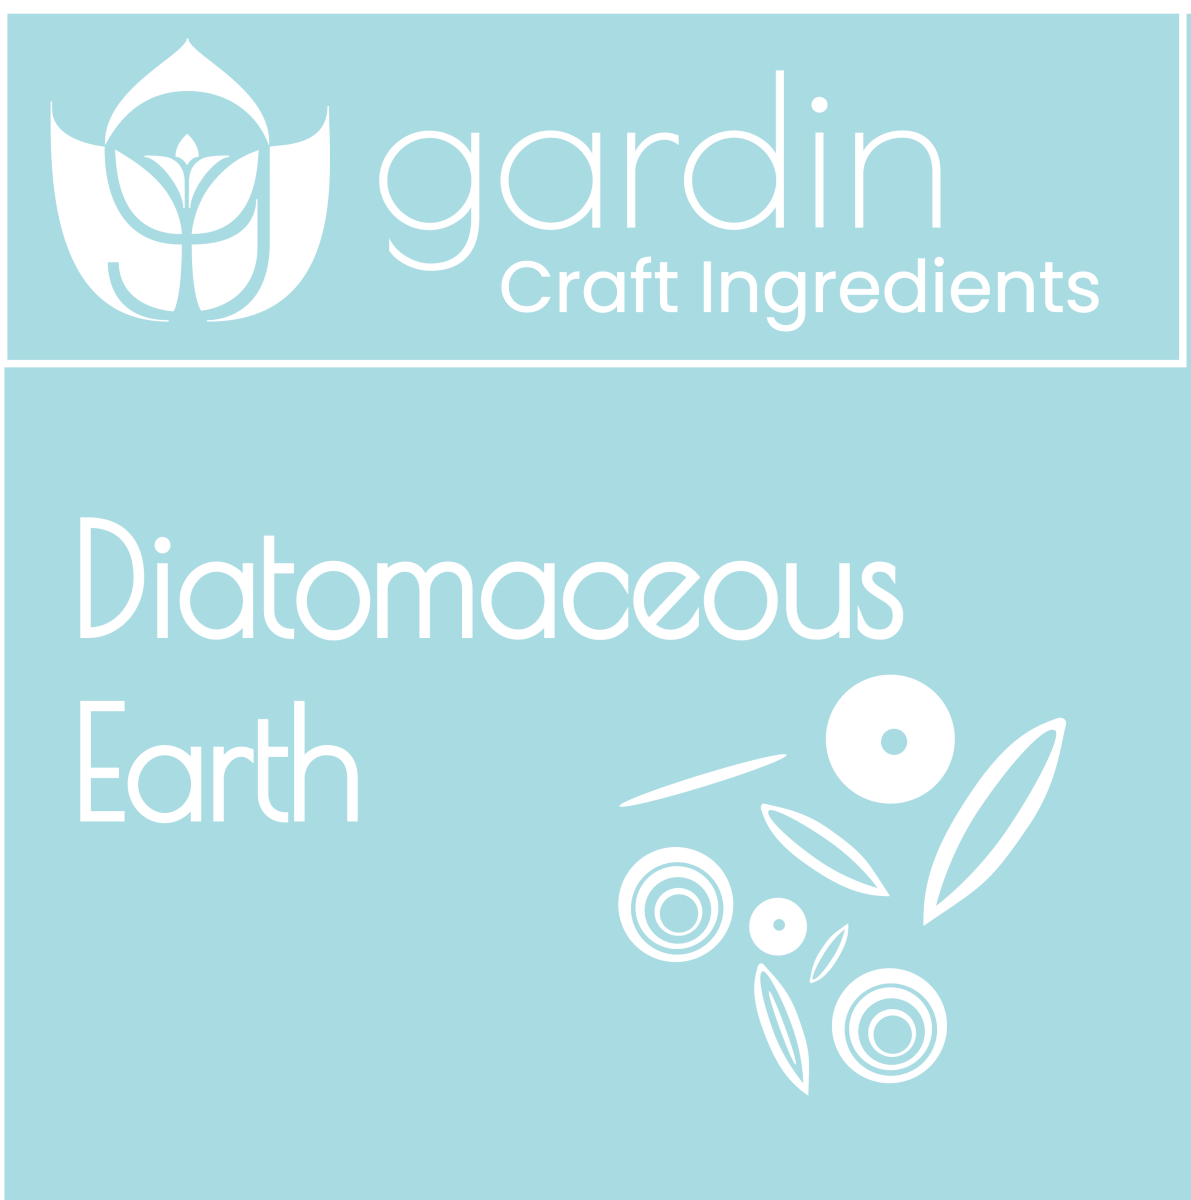 Nutrients, Additives & Solutions - Diatomaceous earth - Gardin Warehouse